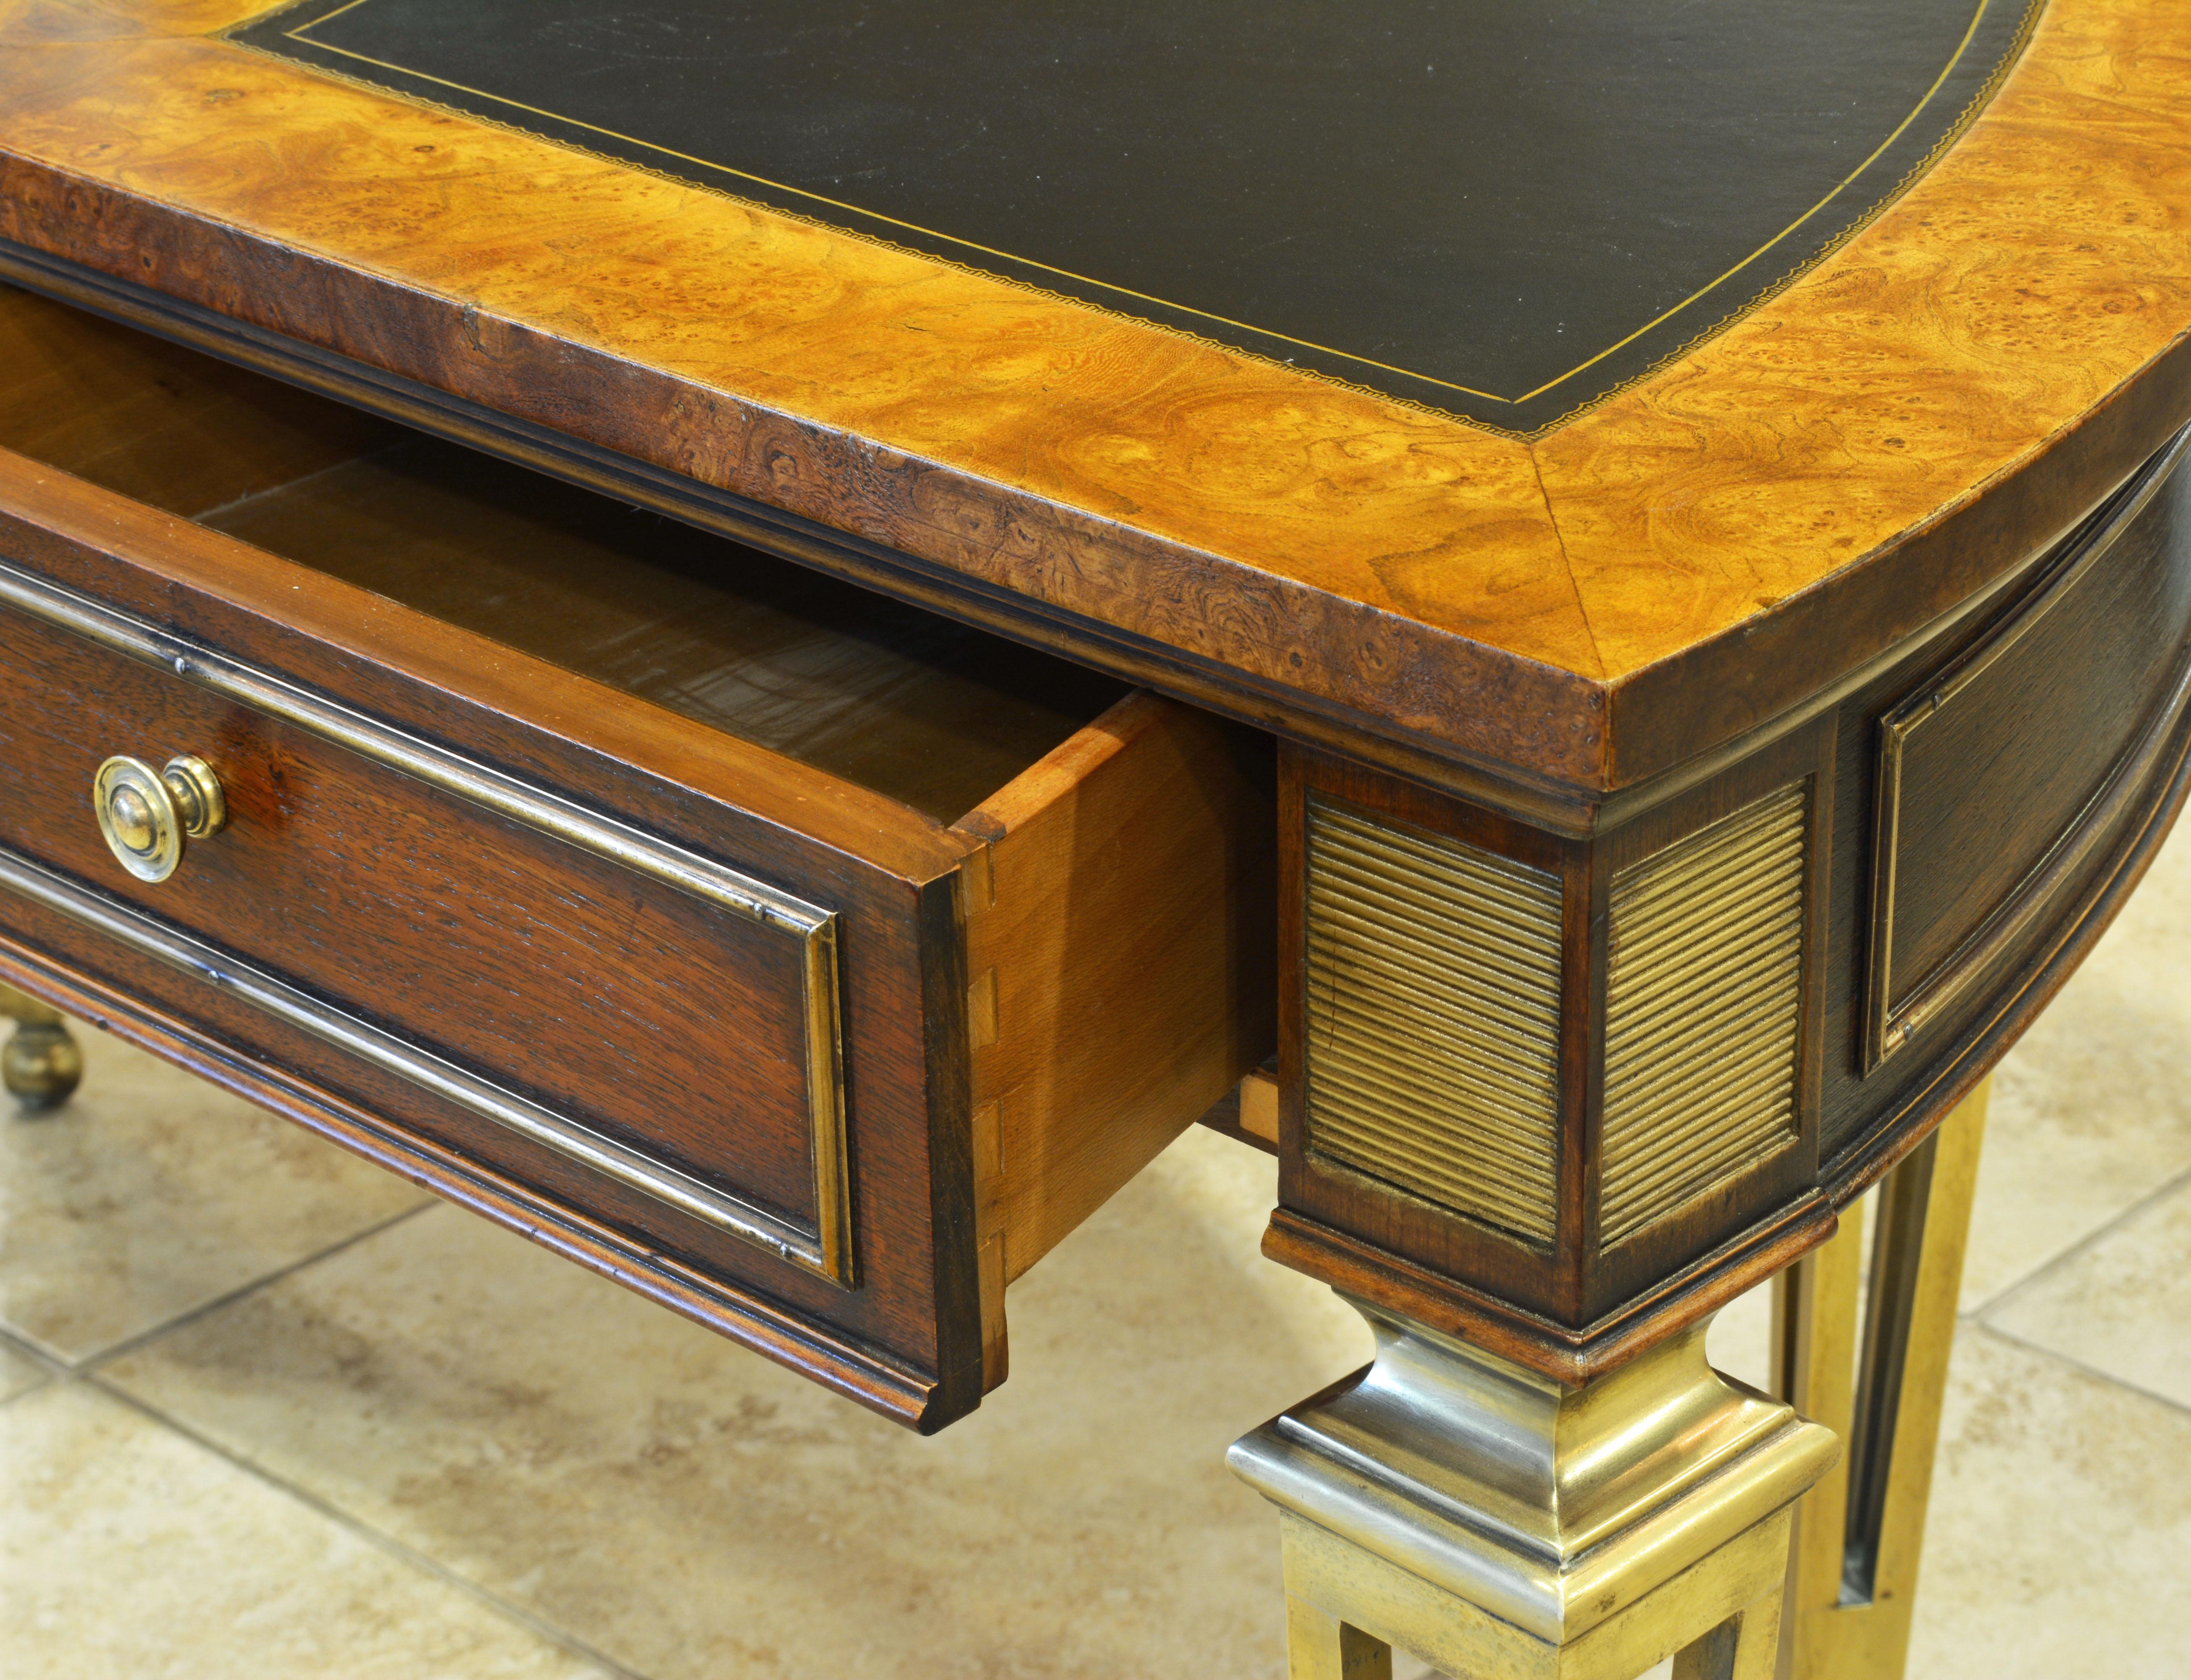 20th Century Exceptional Midcentury Semi Circular Brass and Burled Wood Desk by Mastercraft